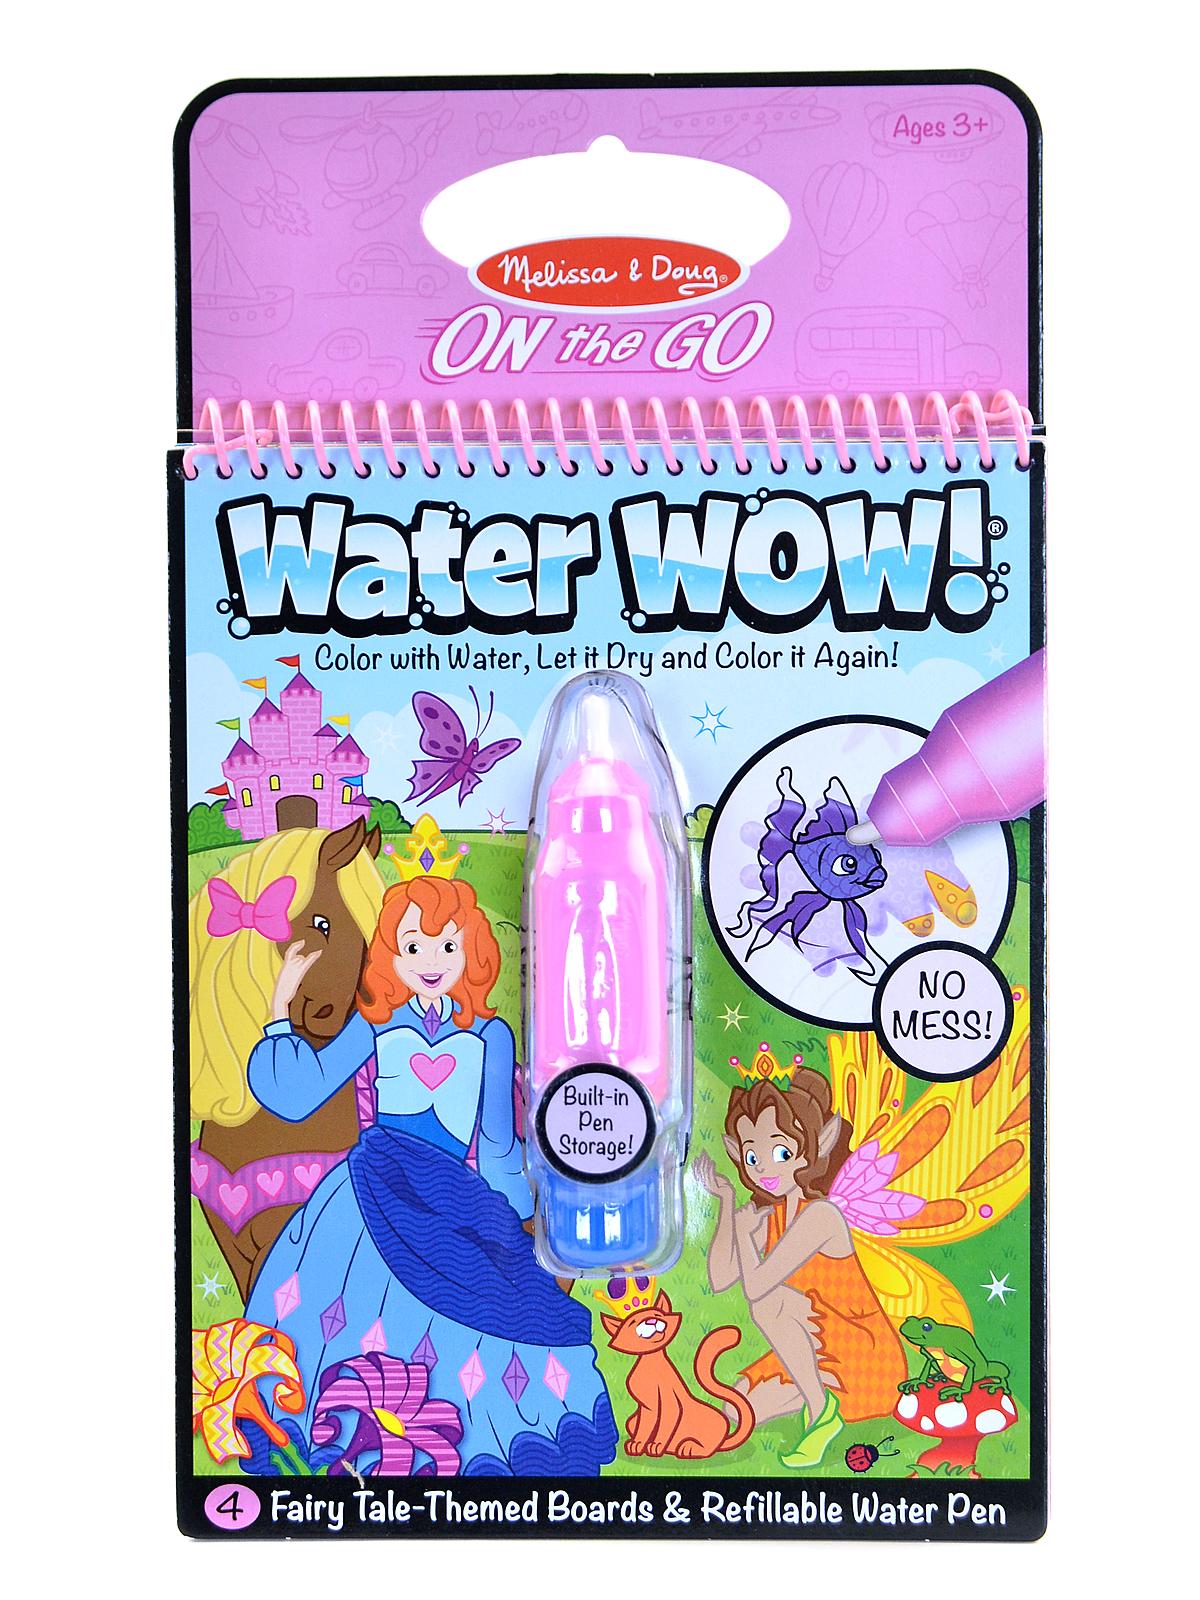 On The Go Water Wow Fairy Tale